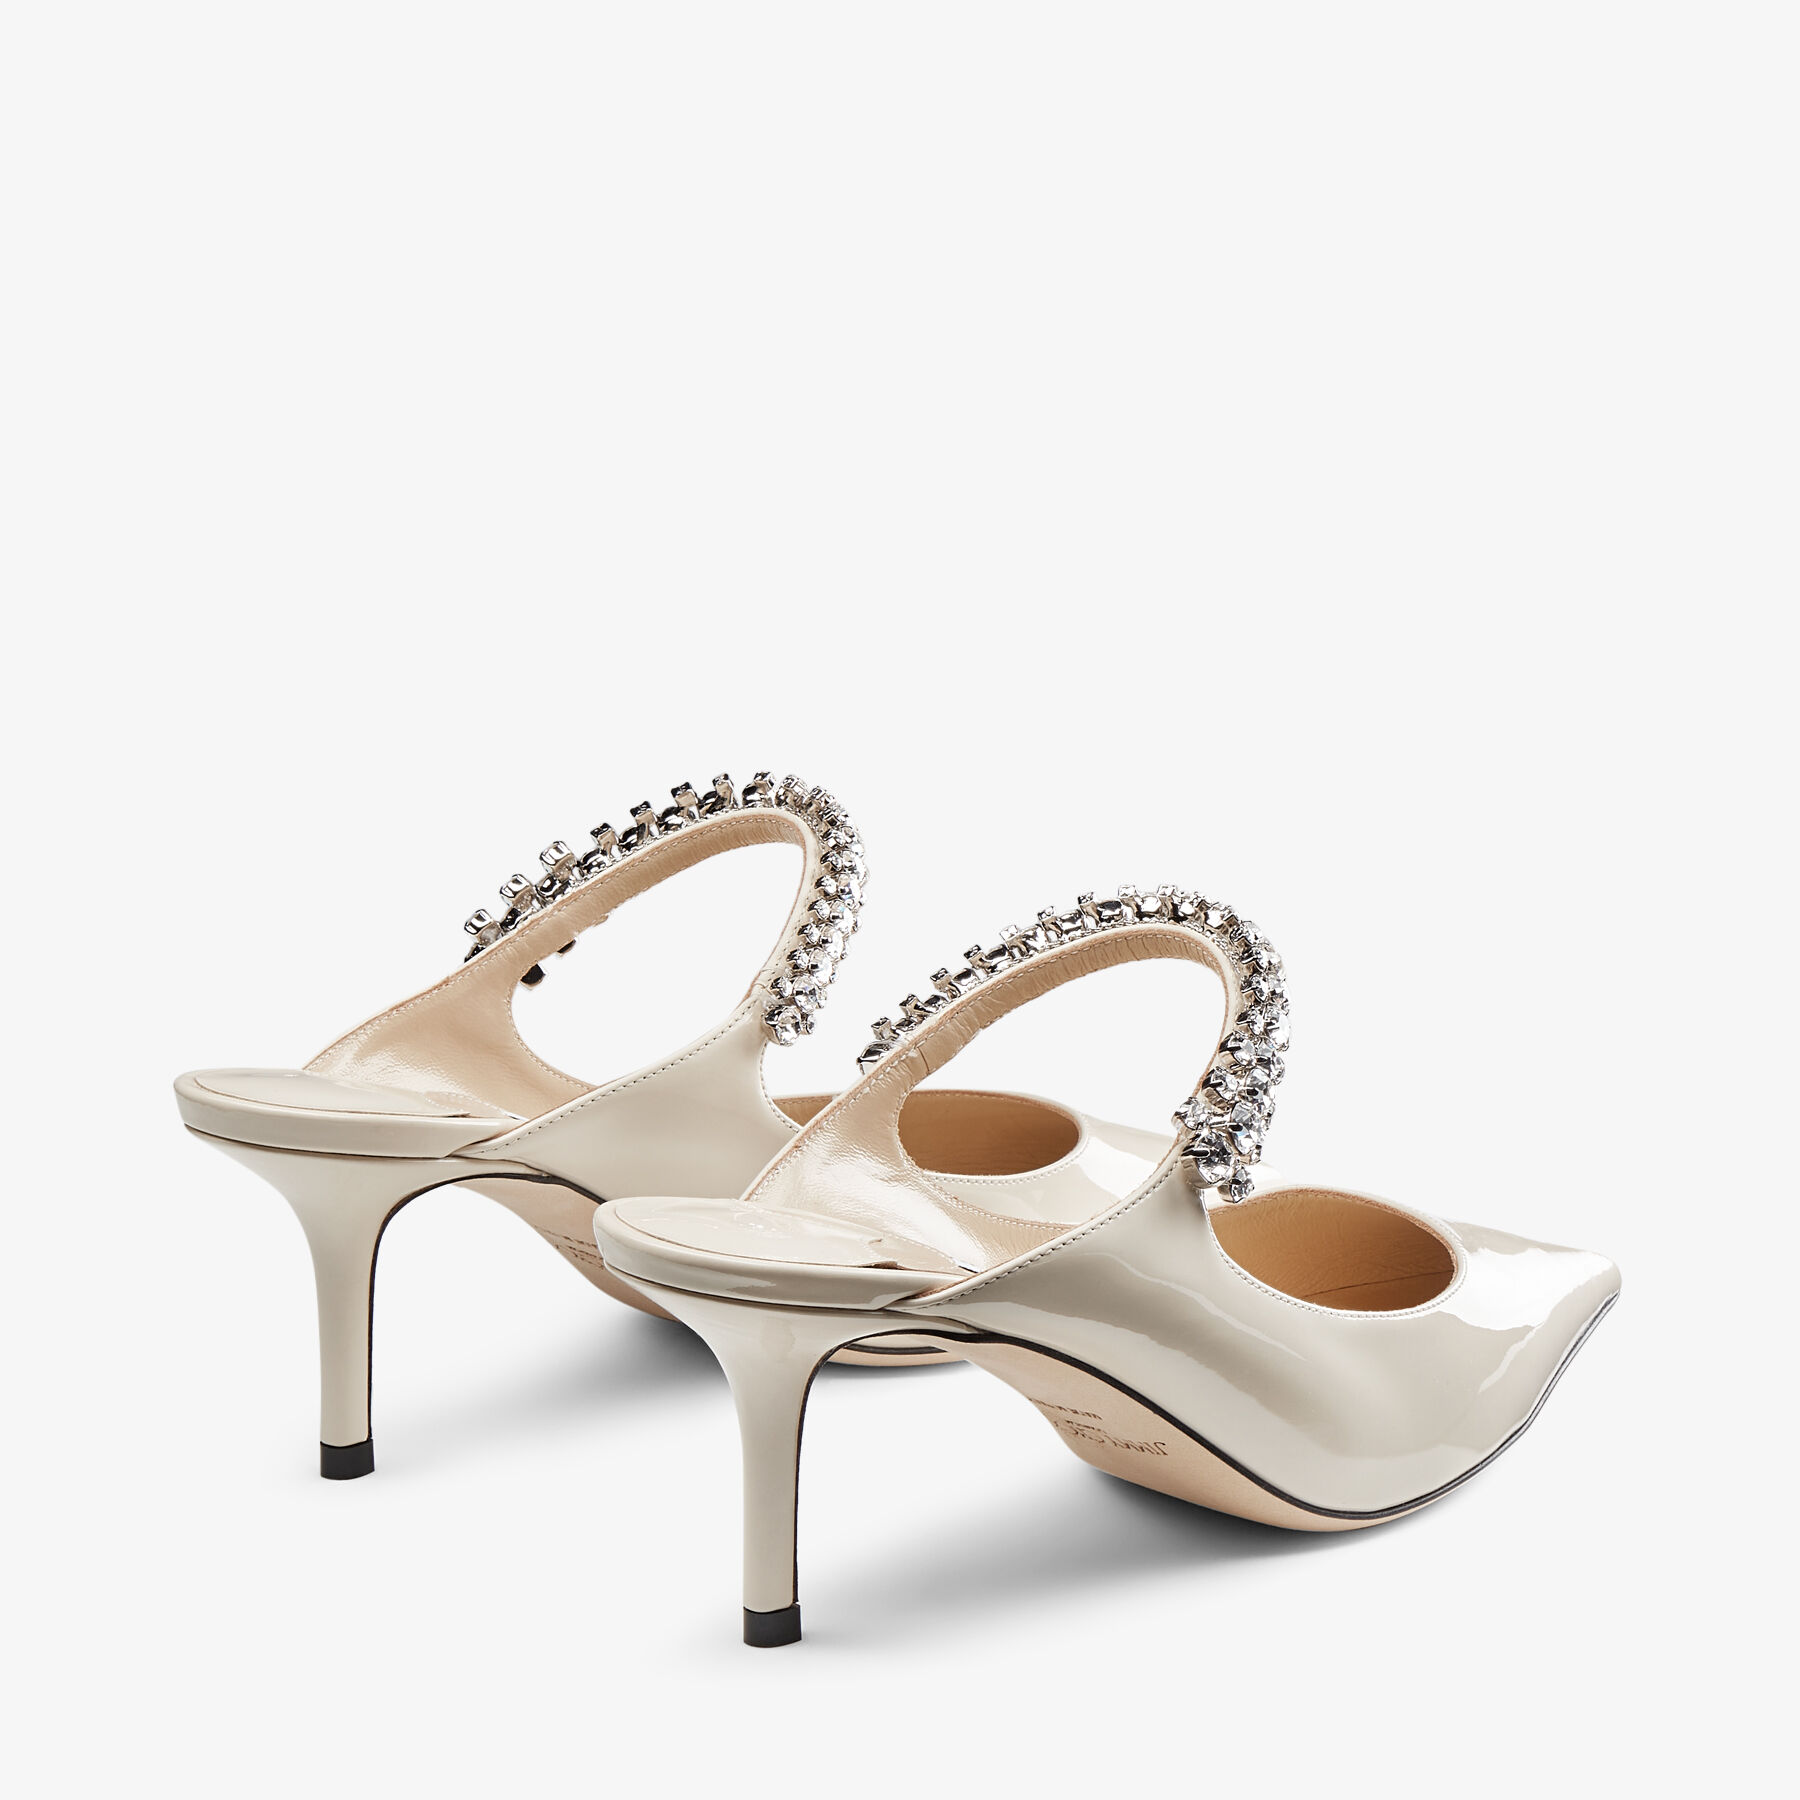 Bing 65 | Linen Patent Leather Mules with Crystal Strap | JIMMY CHOO